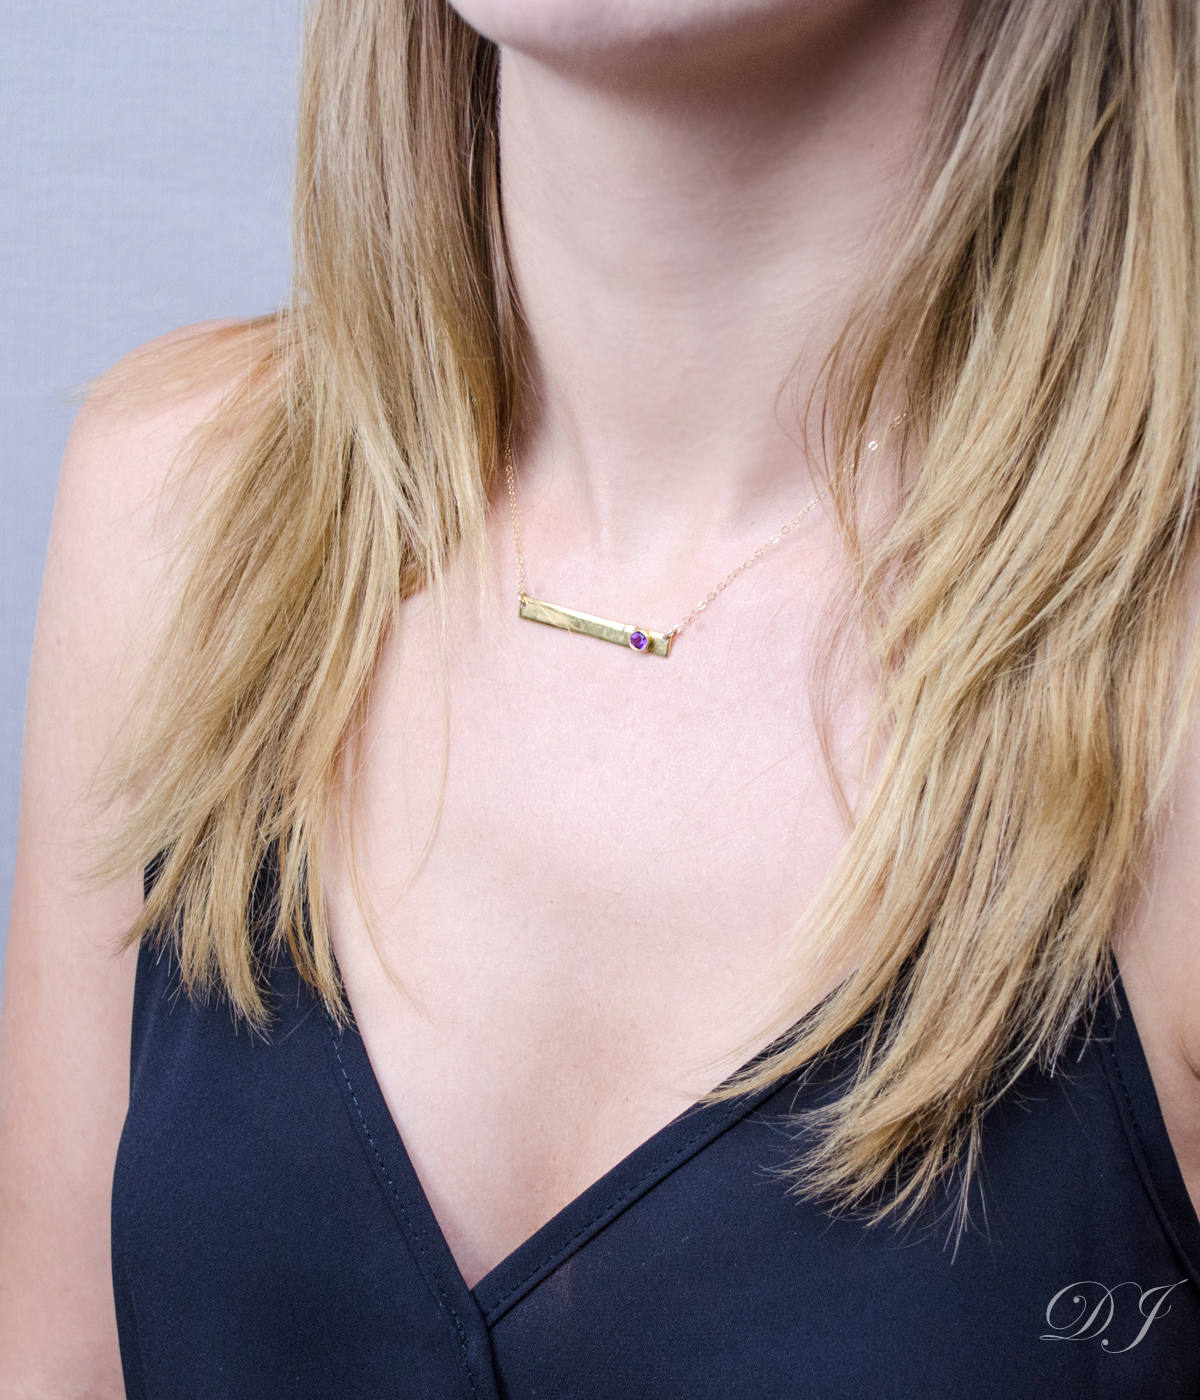 Baby V Bar and Chain Necklace in Gold